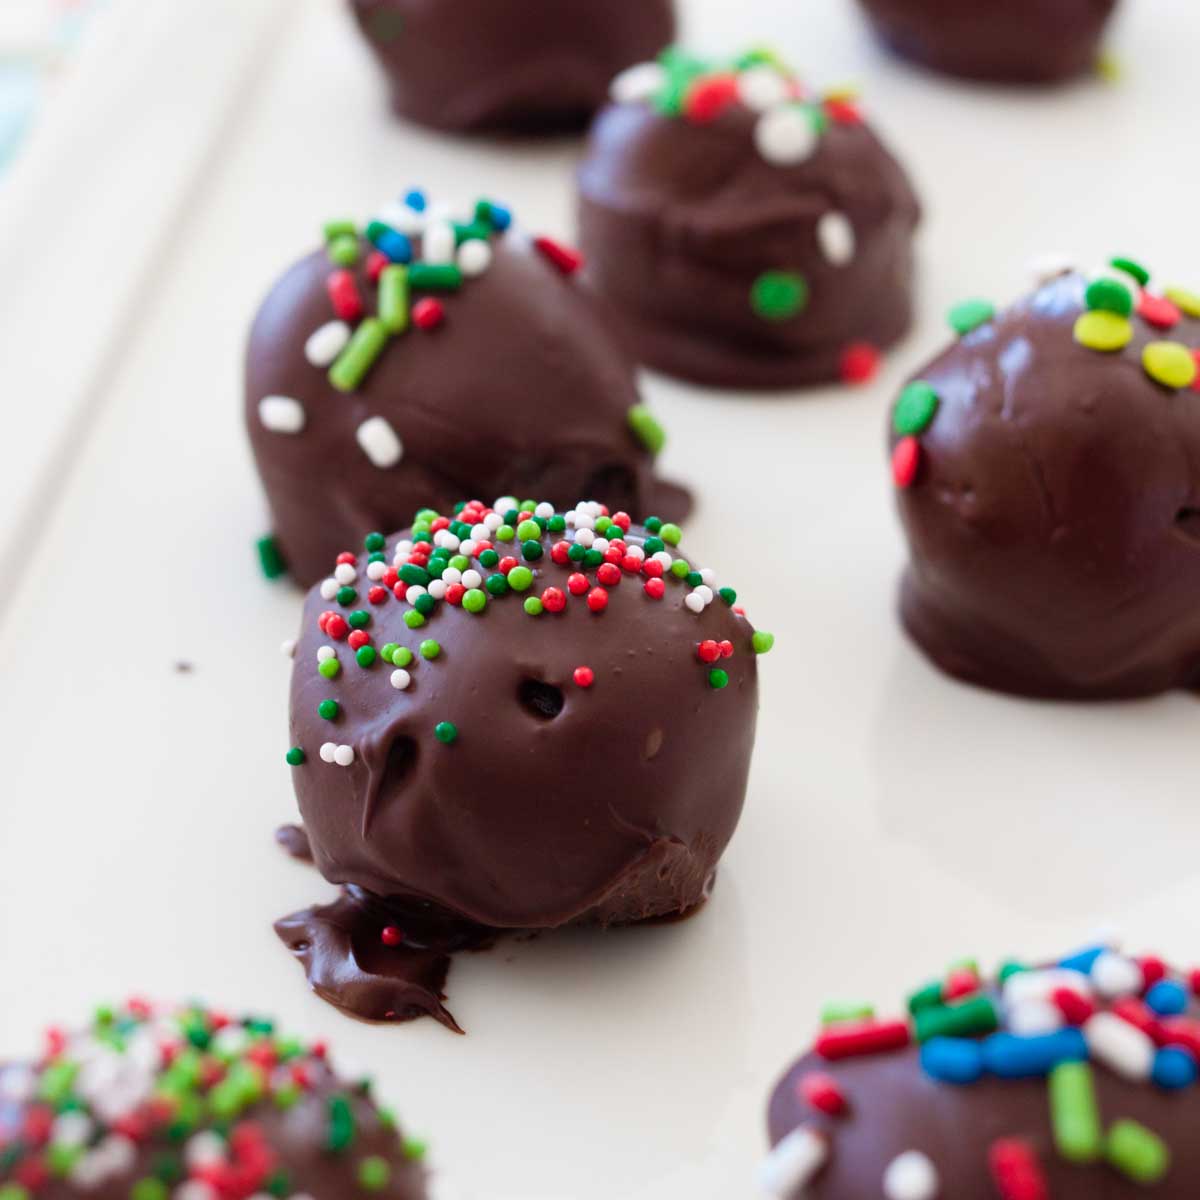 A tray of chocolate covered Oreo truffles with red and green sprinkles.